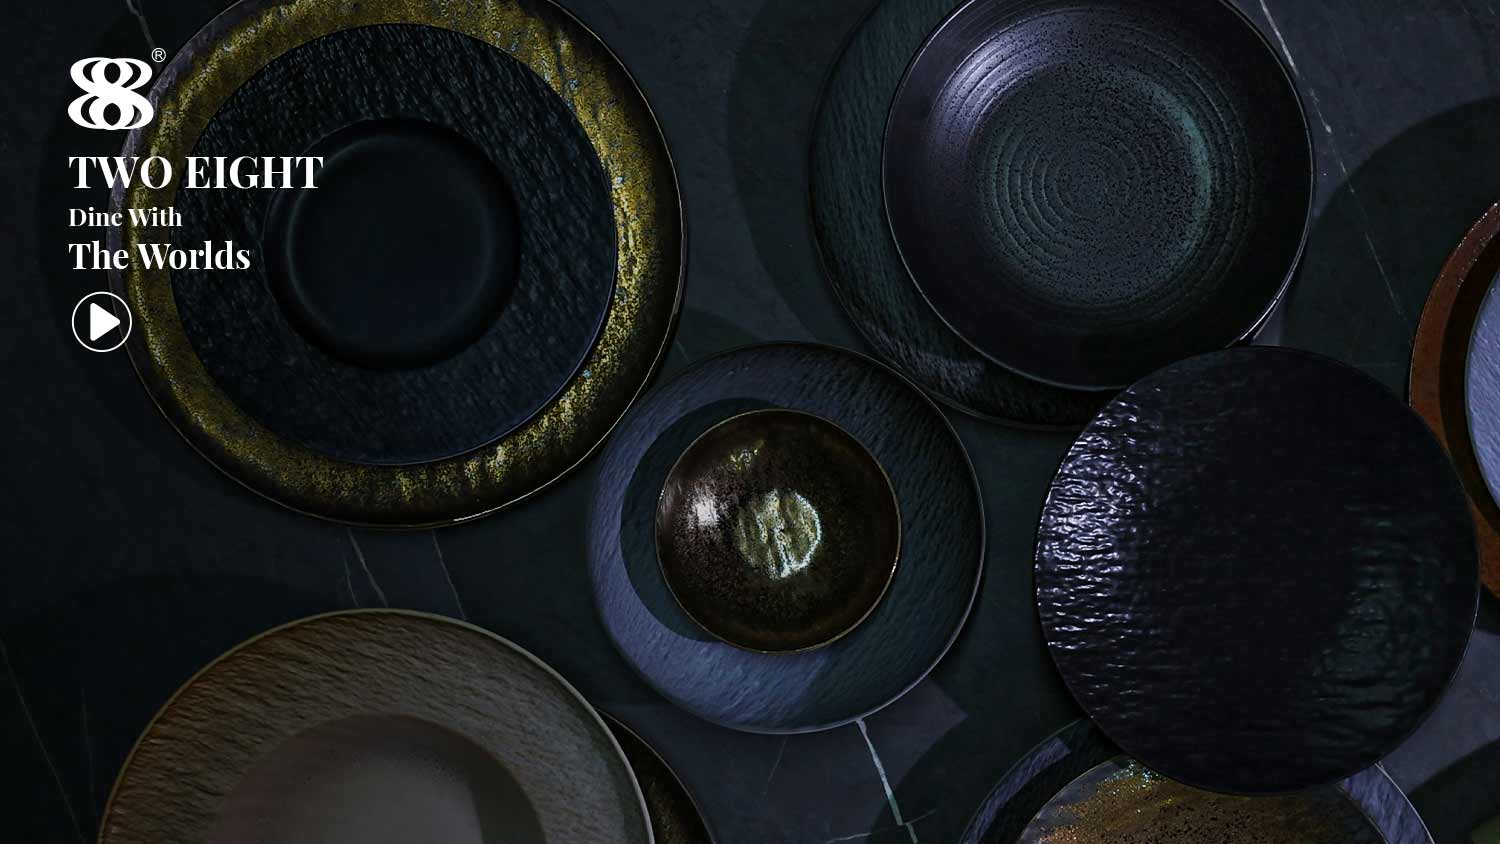 Metallic - 2021 Summer New Porcelain Tableware Collection, Attractive Design to Make Your Dinnerware Unique.